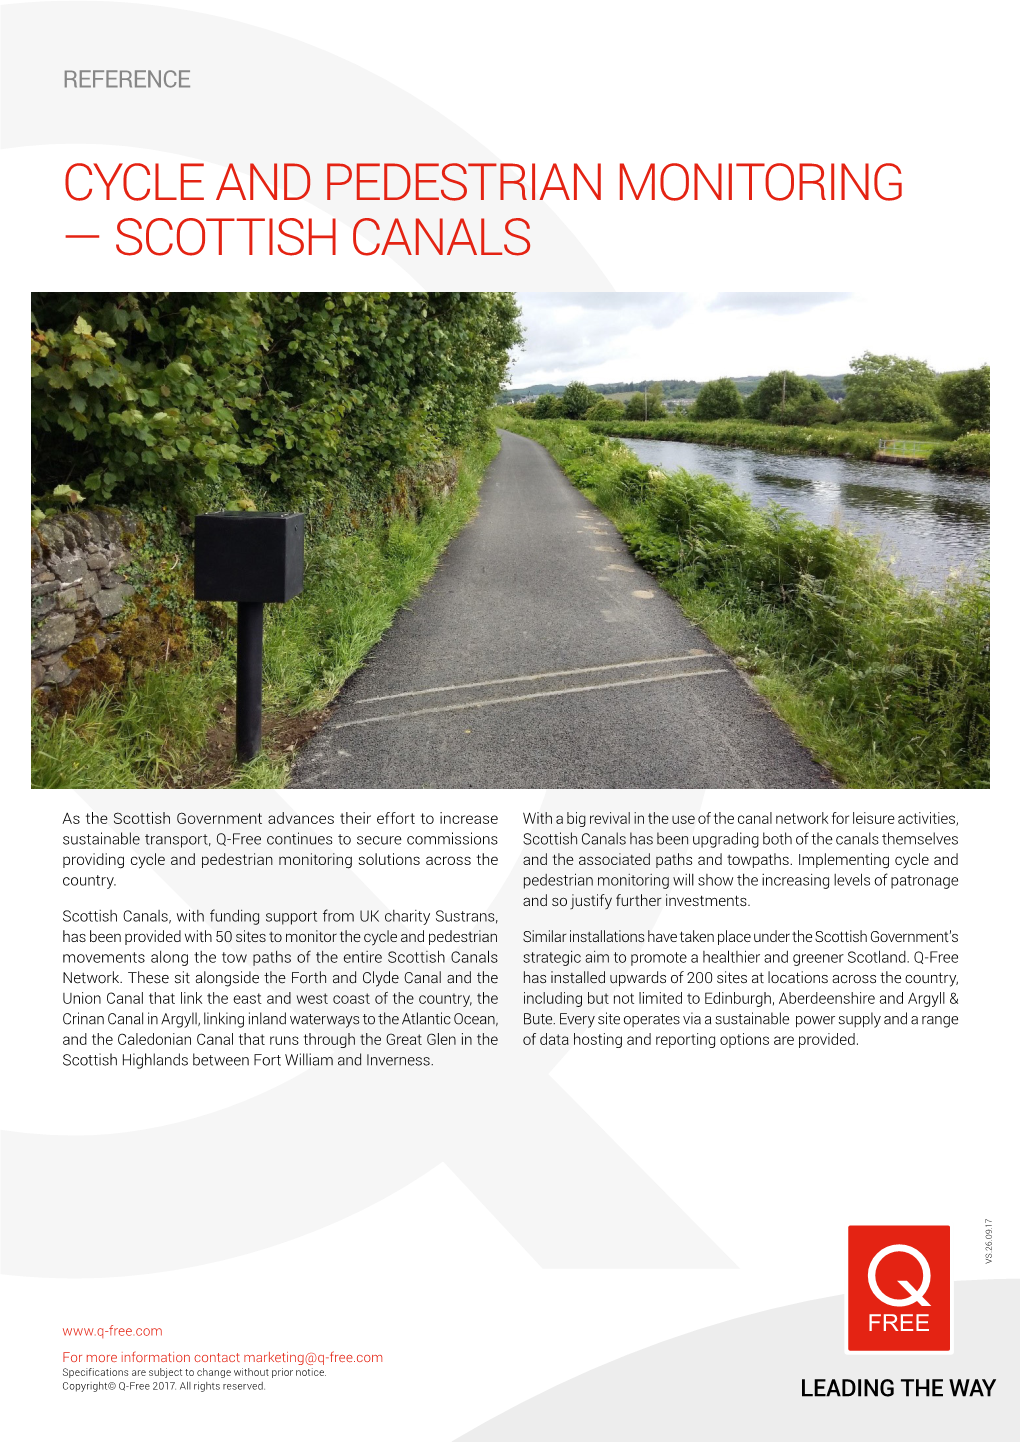 Cycle and Pedestrian Monitoring — Scottish Canals